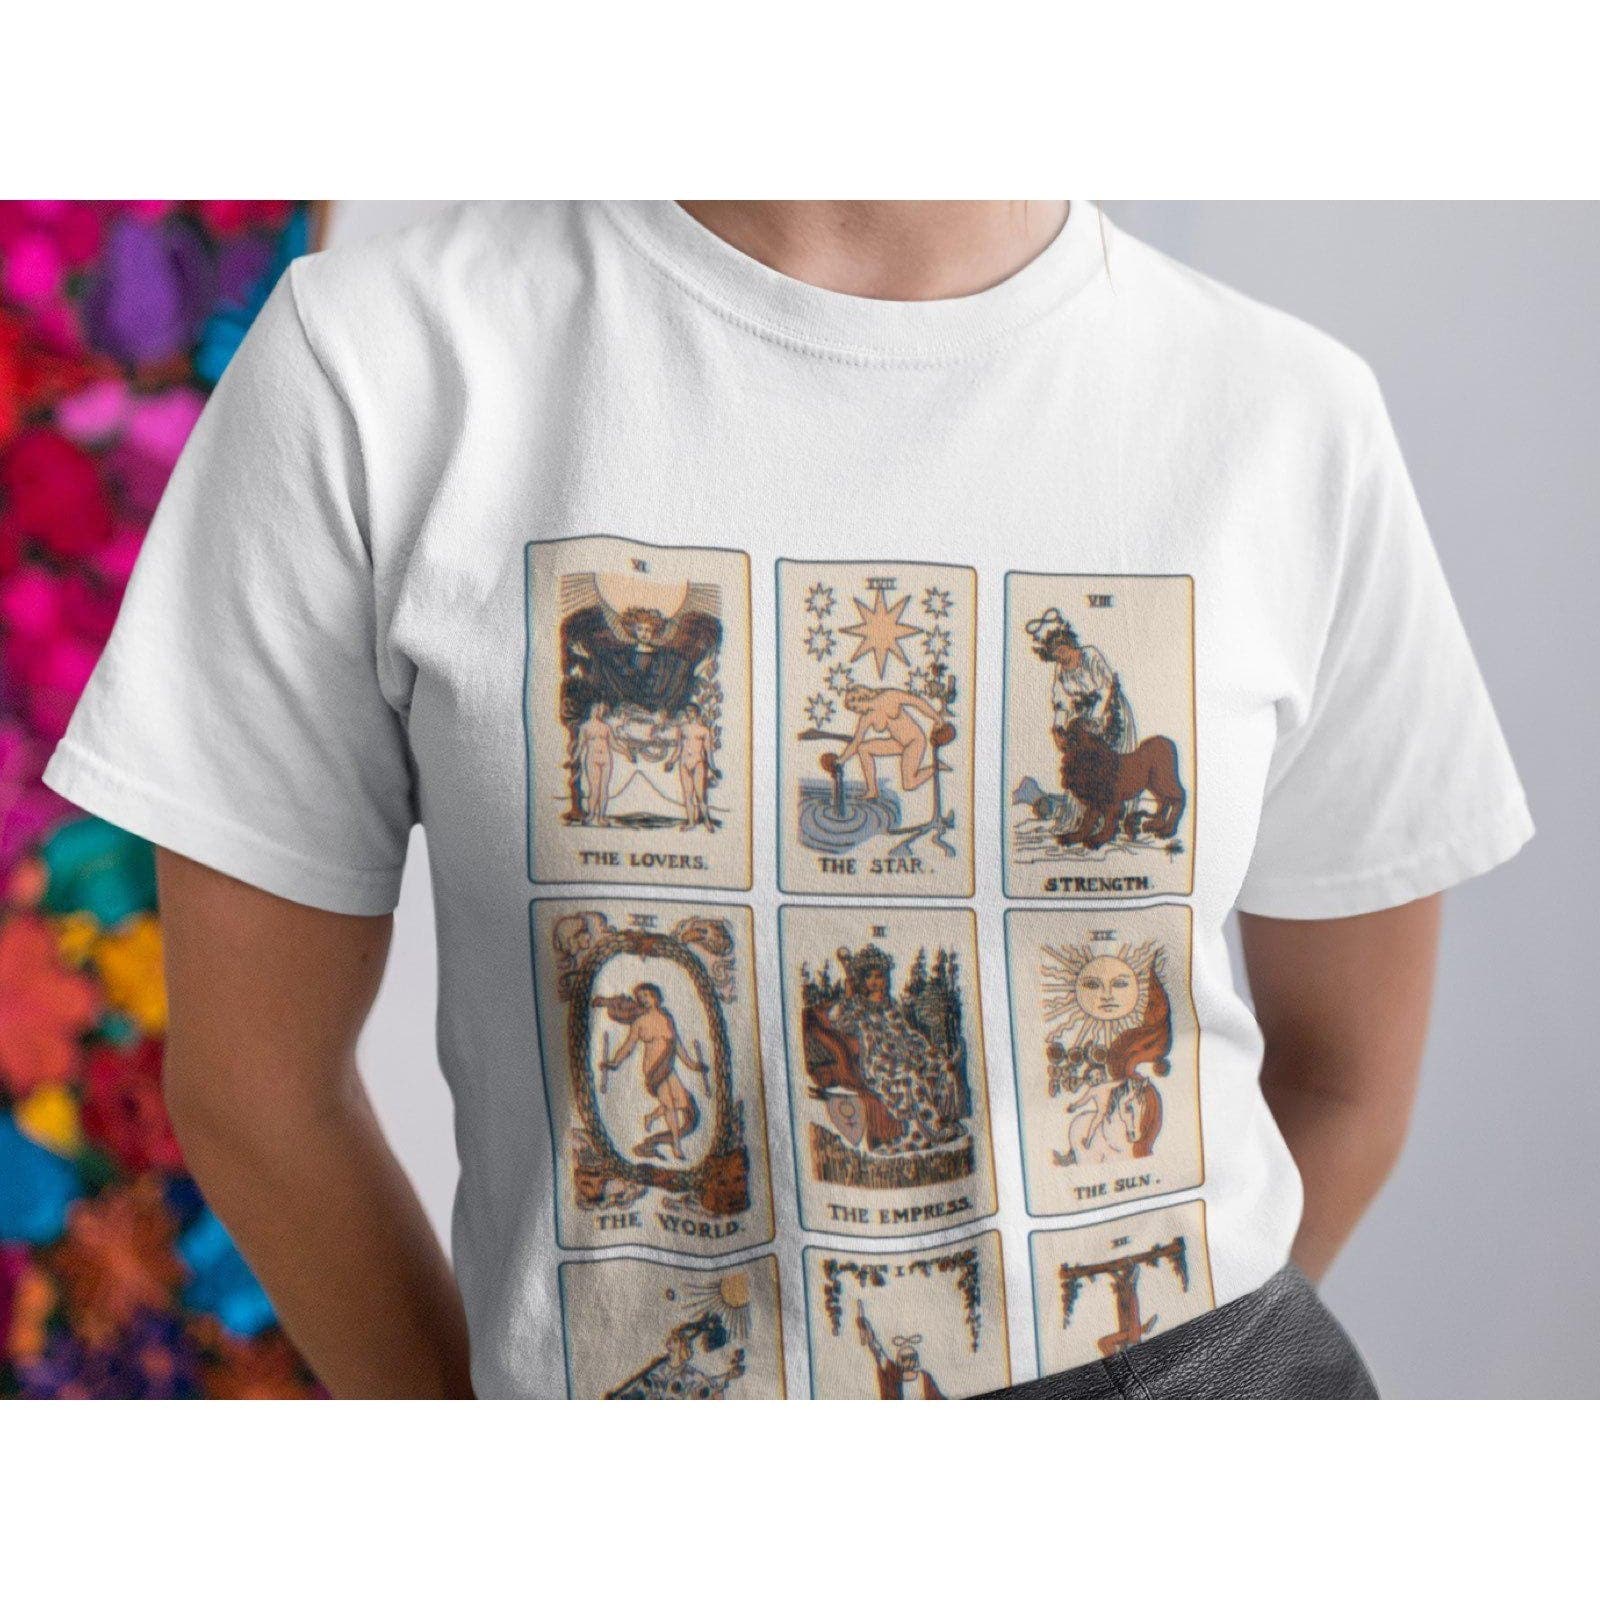 Tarot Card Tee Graphic Tshirt For Women Ladies Tee Shirt Aesthetic Witchy T-Shirt With Tarot Cards